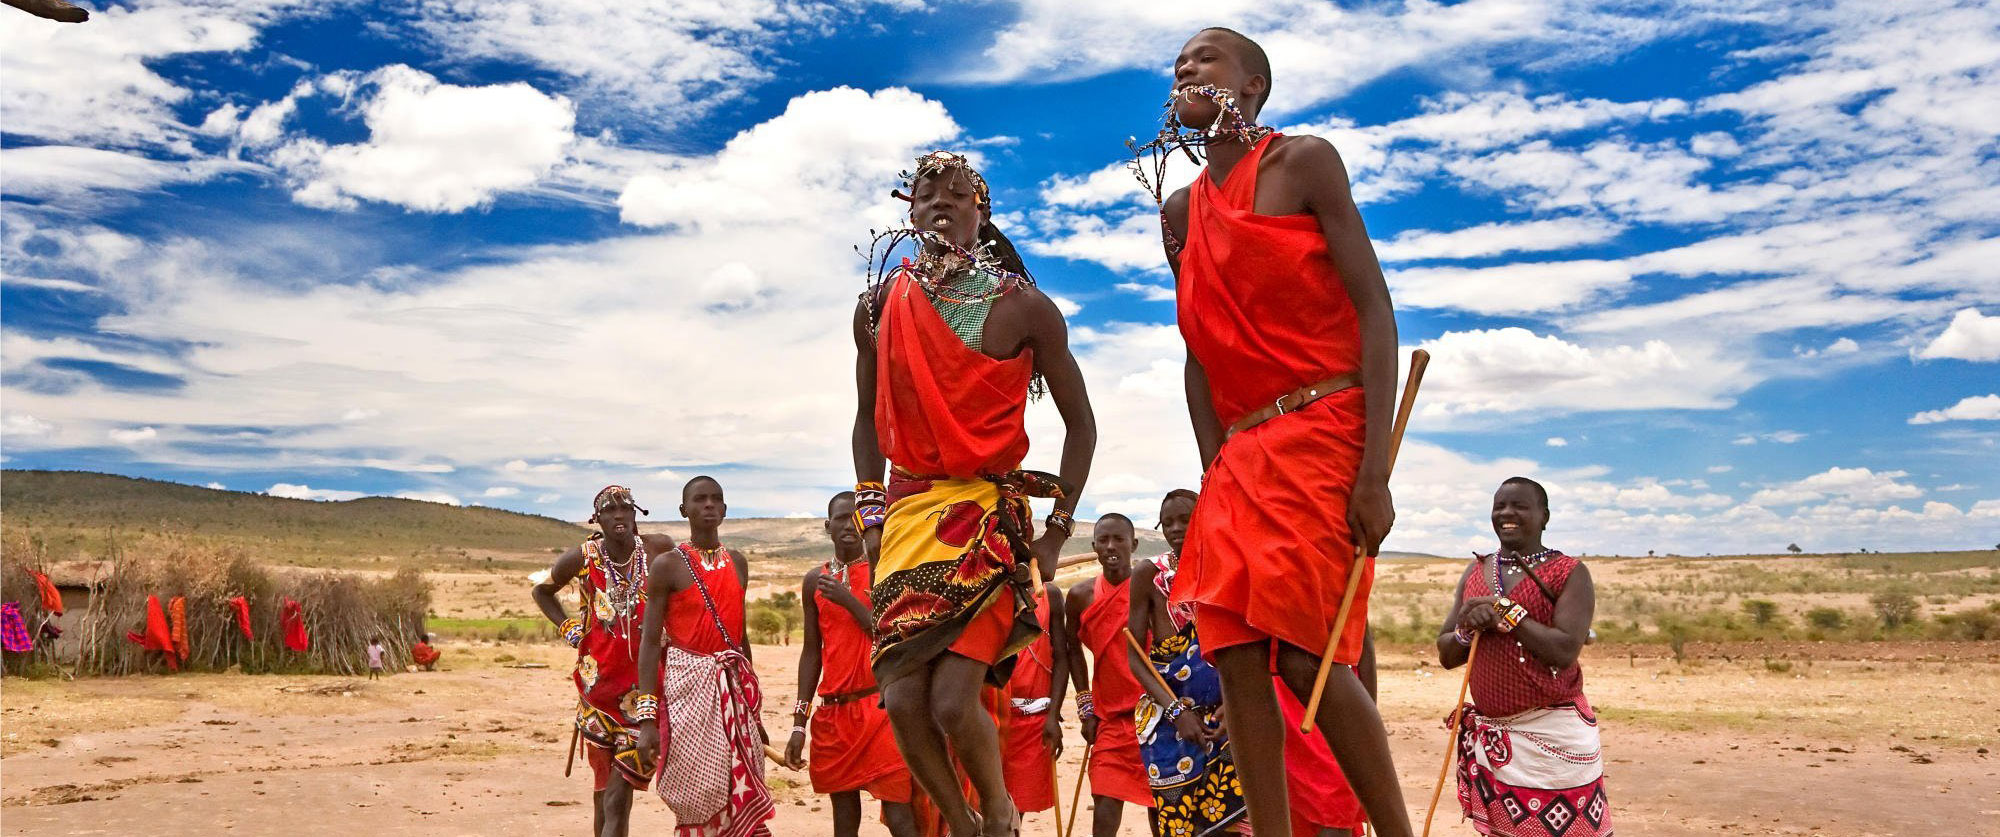 Latest tours and travel jobs in kenya